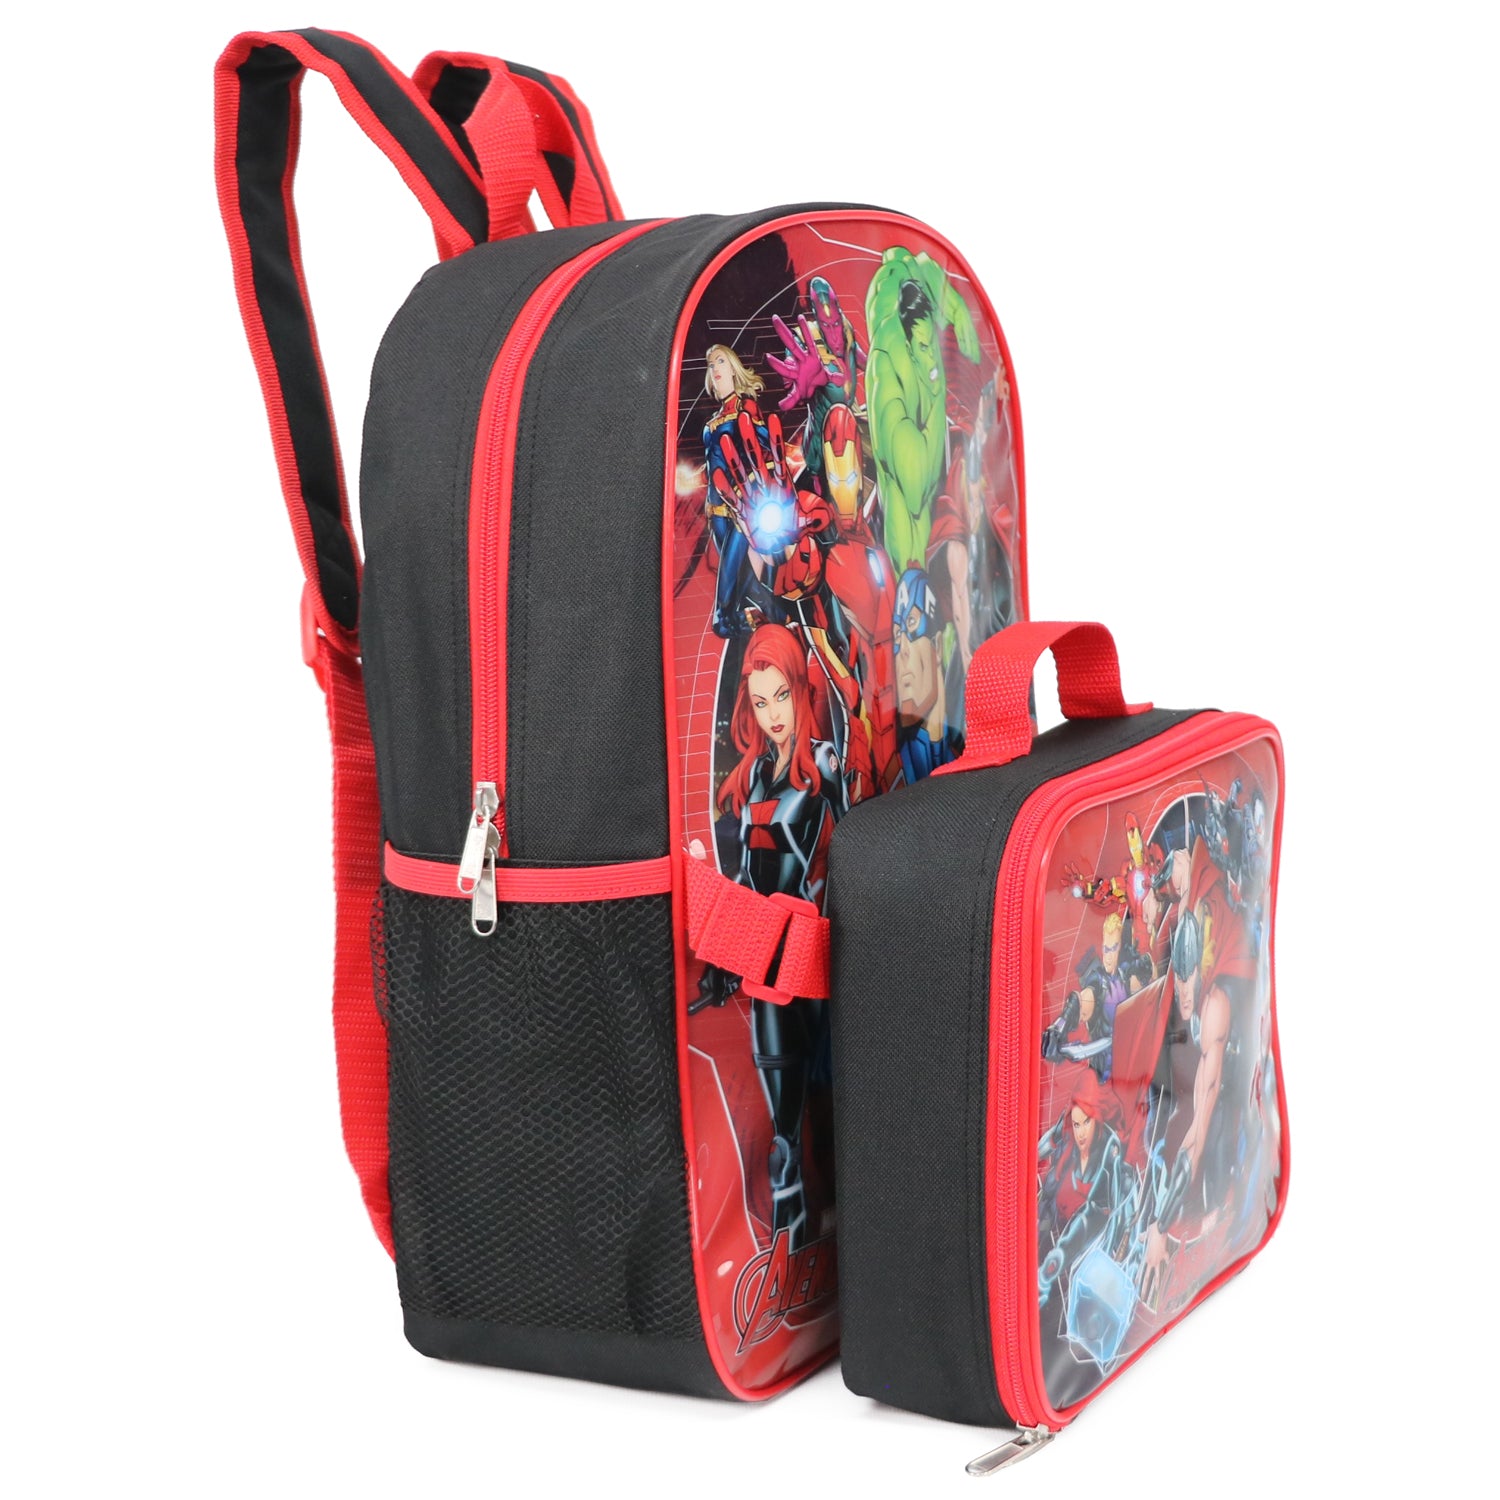 Marvel Avengers Boys' 2-Piece Backpack Lunchbox Set - Red/Multi, One Size